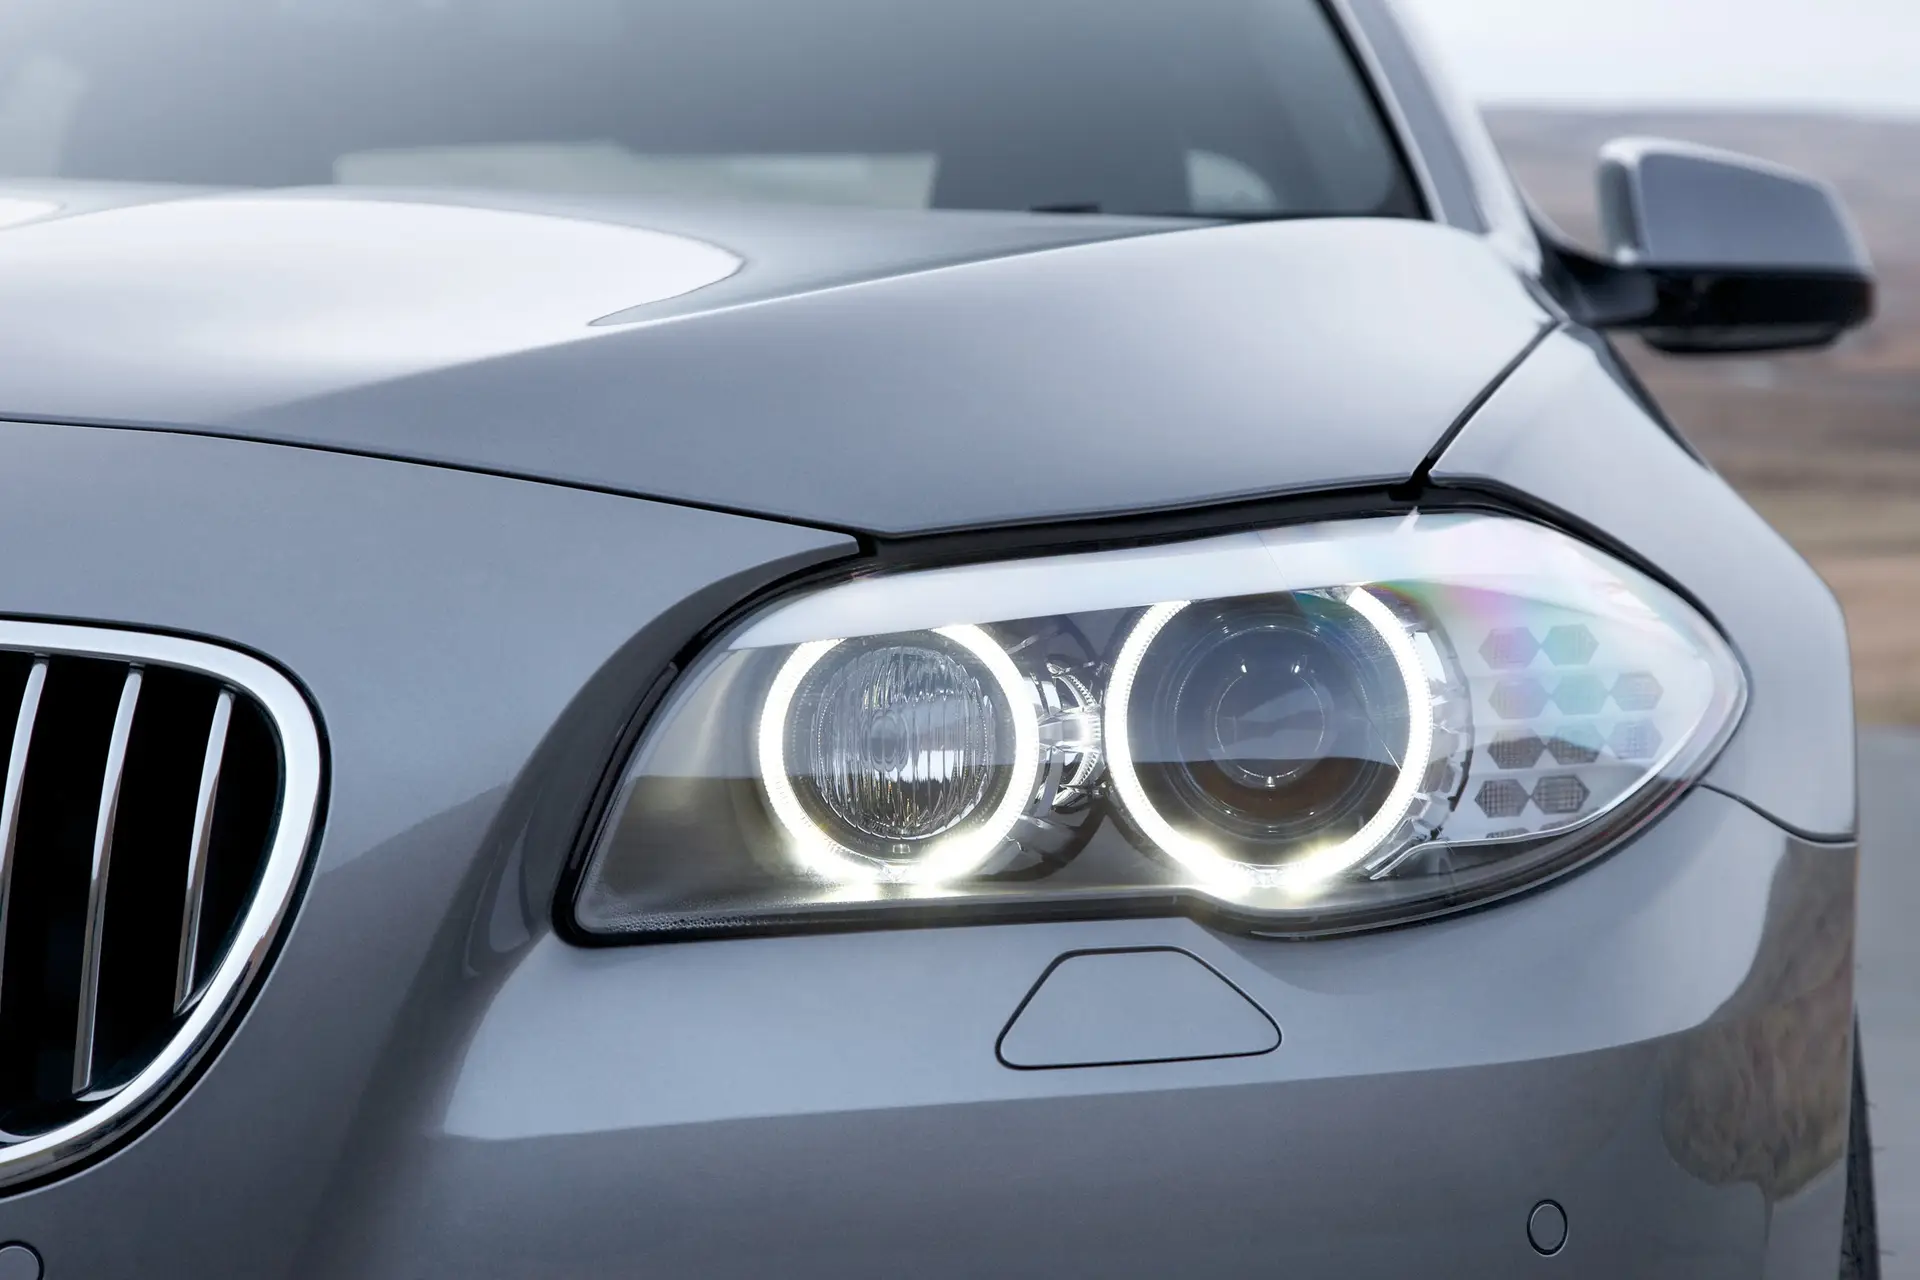 BMW 5 Series (2010-2017) Review: Exterior close up photo of the BMW 5 Series headlight